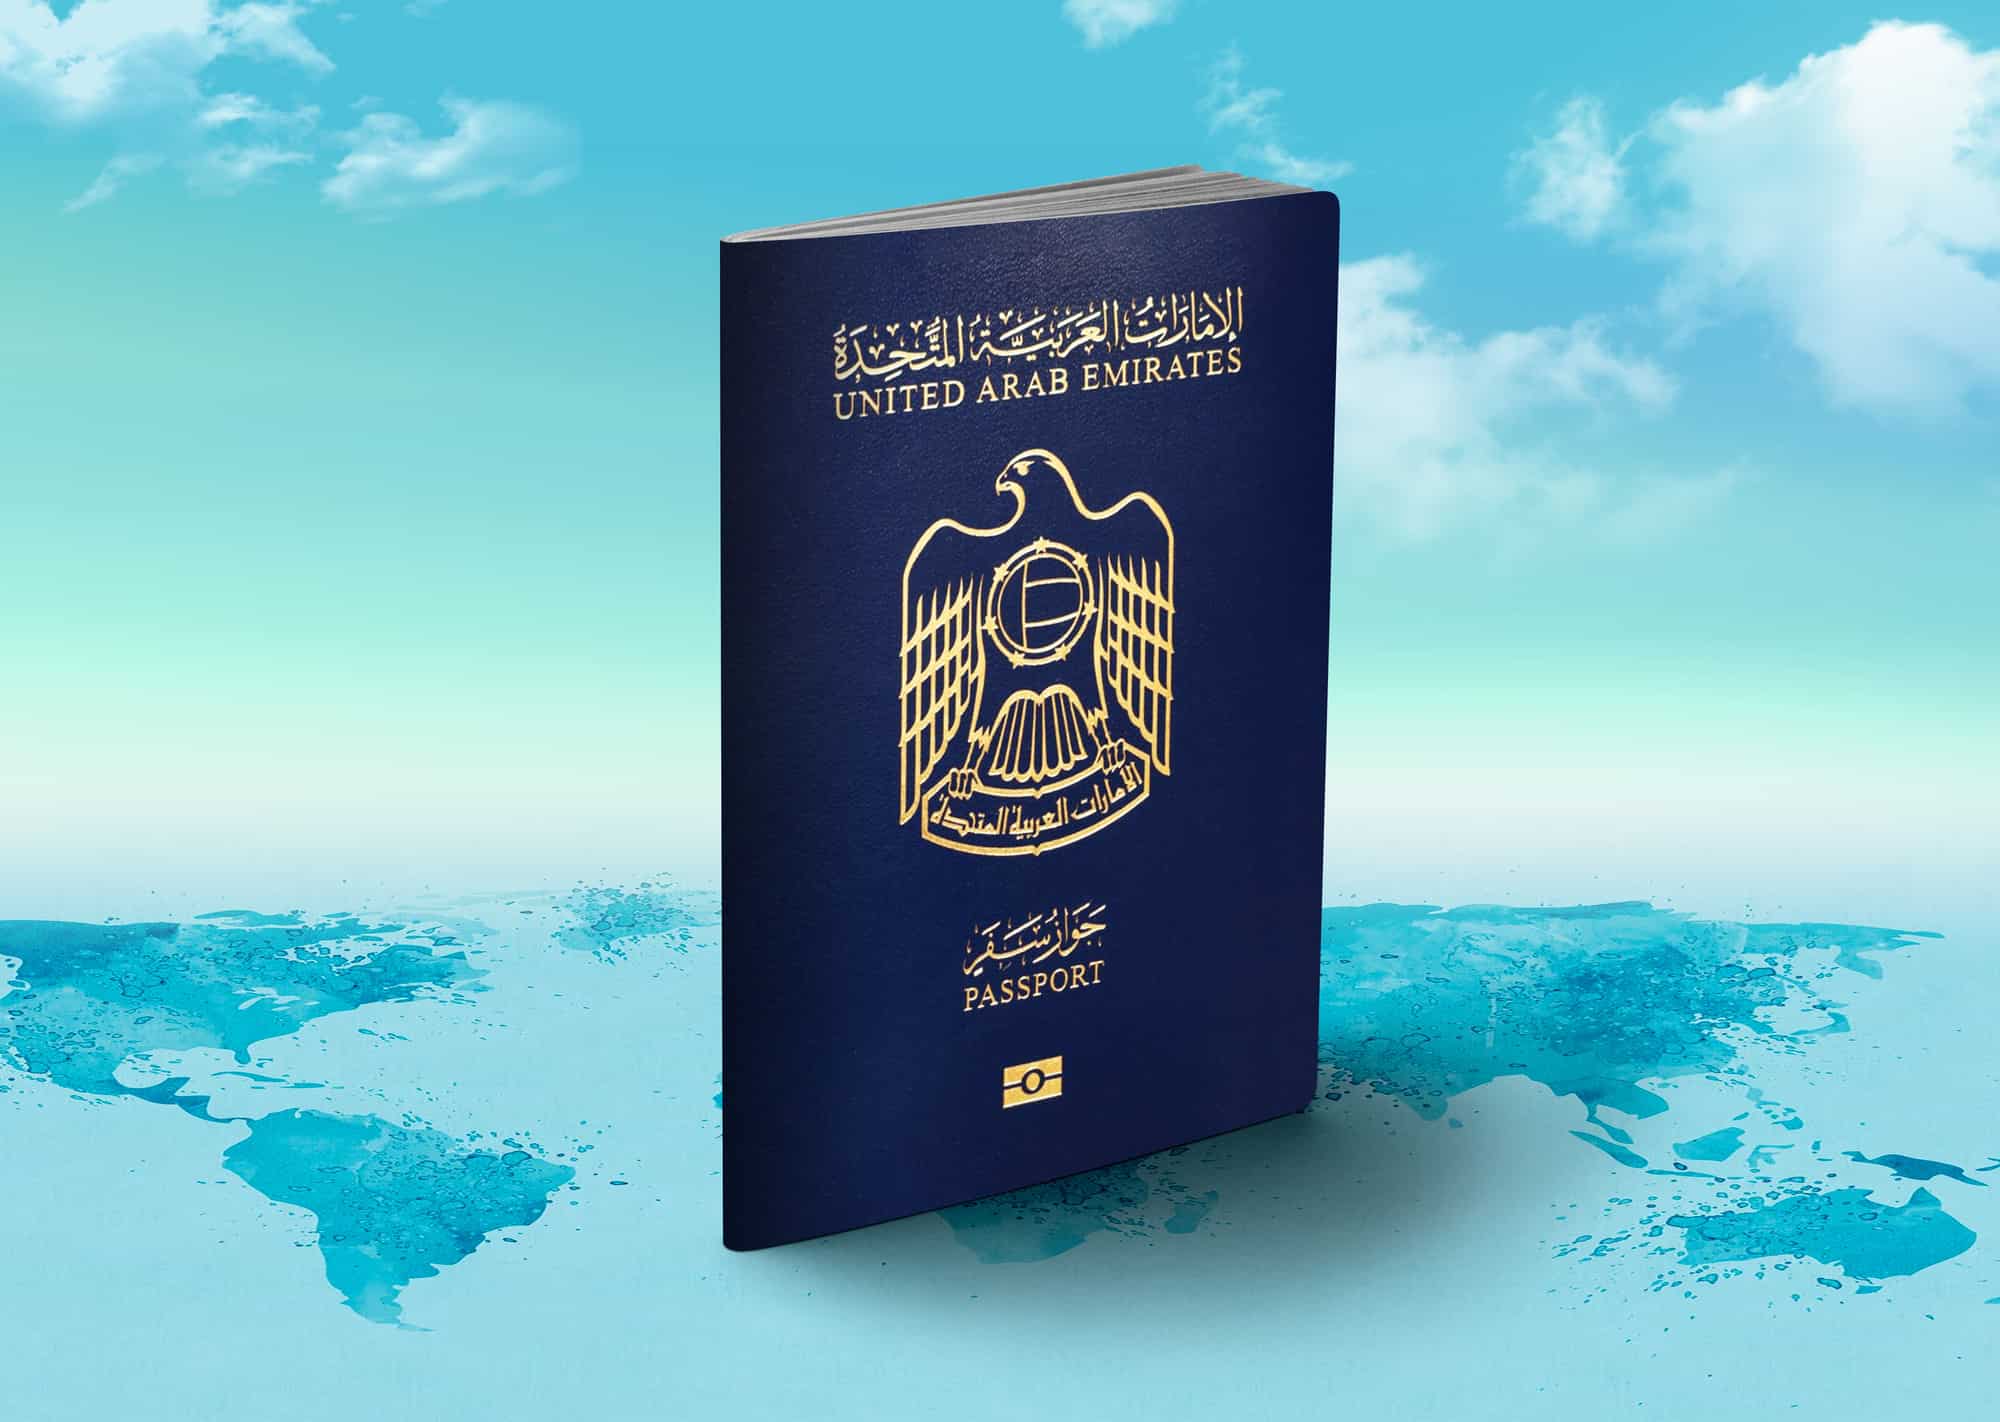 UAE Citizenship for Expats